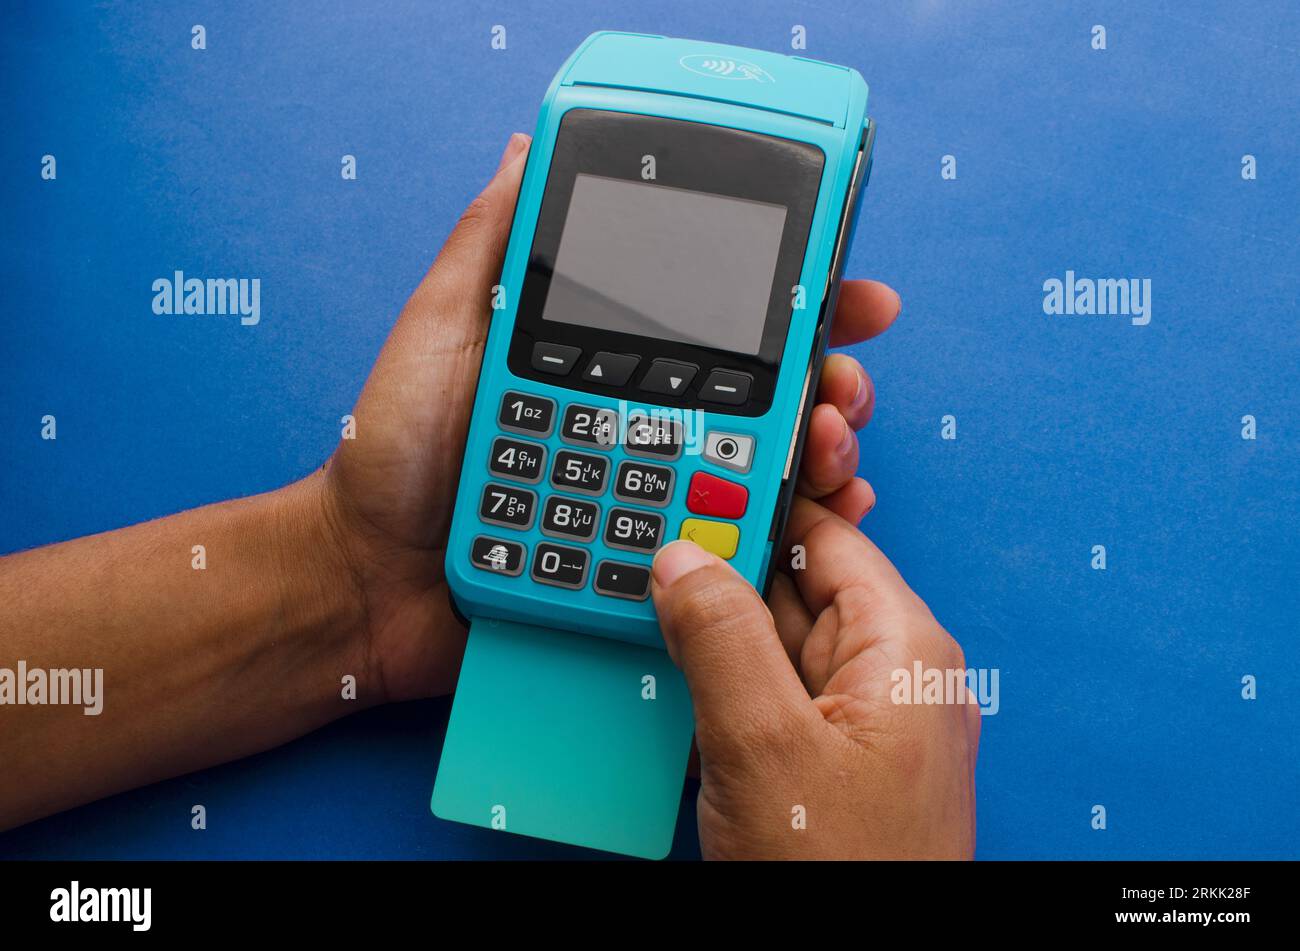 Closeup of hands holding a modern credit card payment device, Contactless technology facilitating fast and secure transactions. Stock Photo